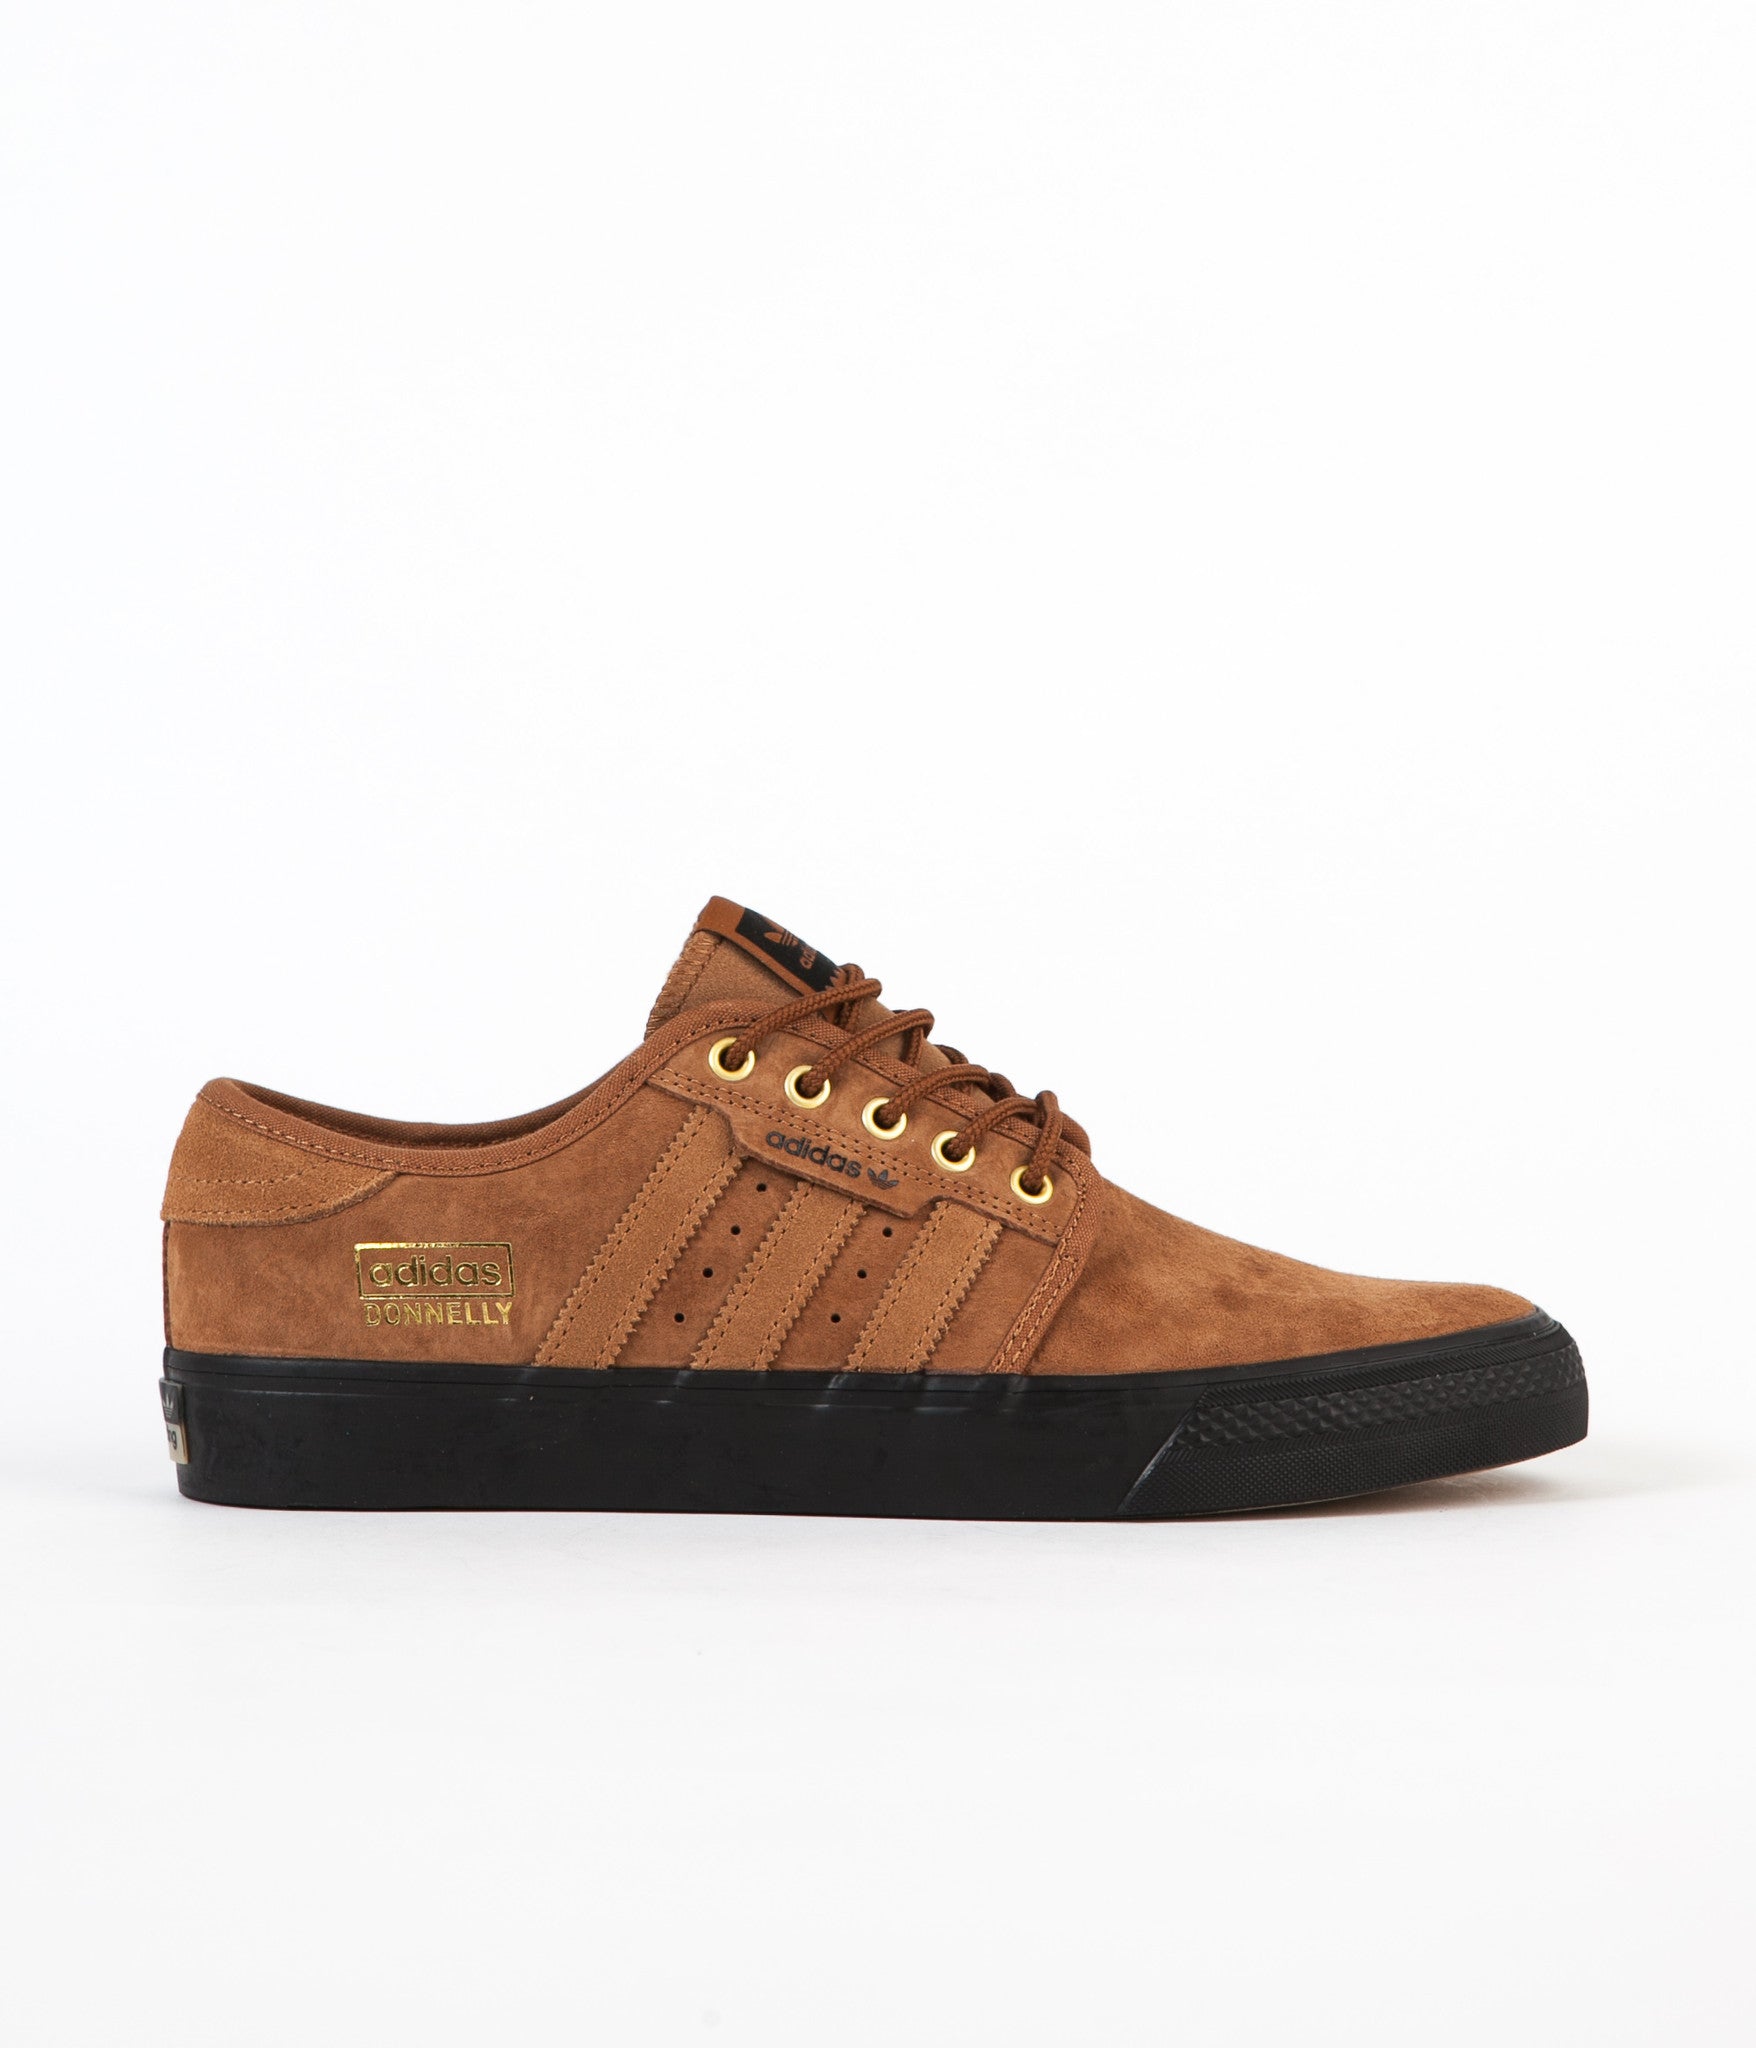 adidas donnelly brown